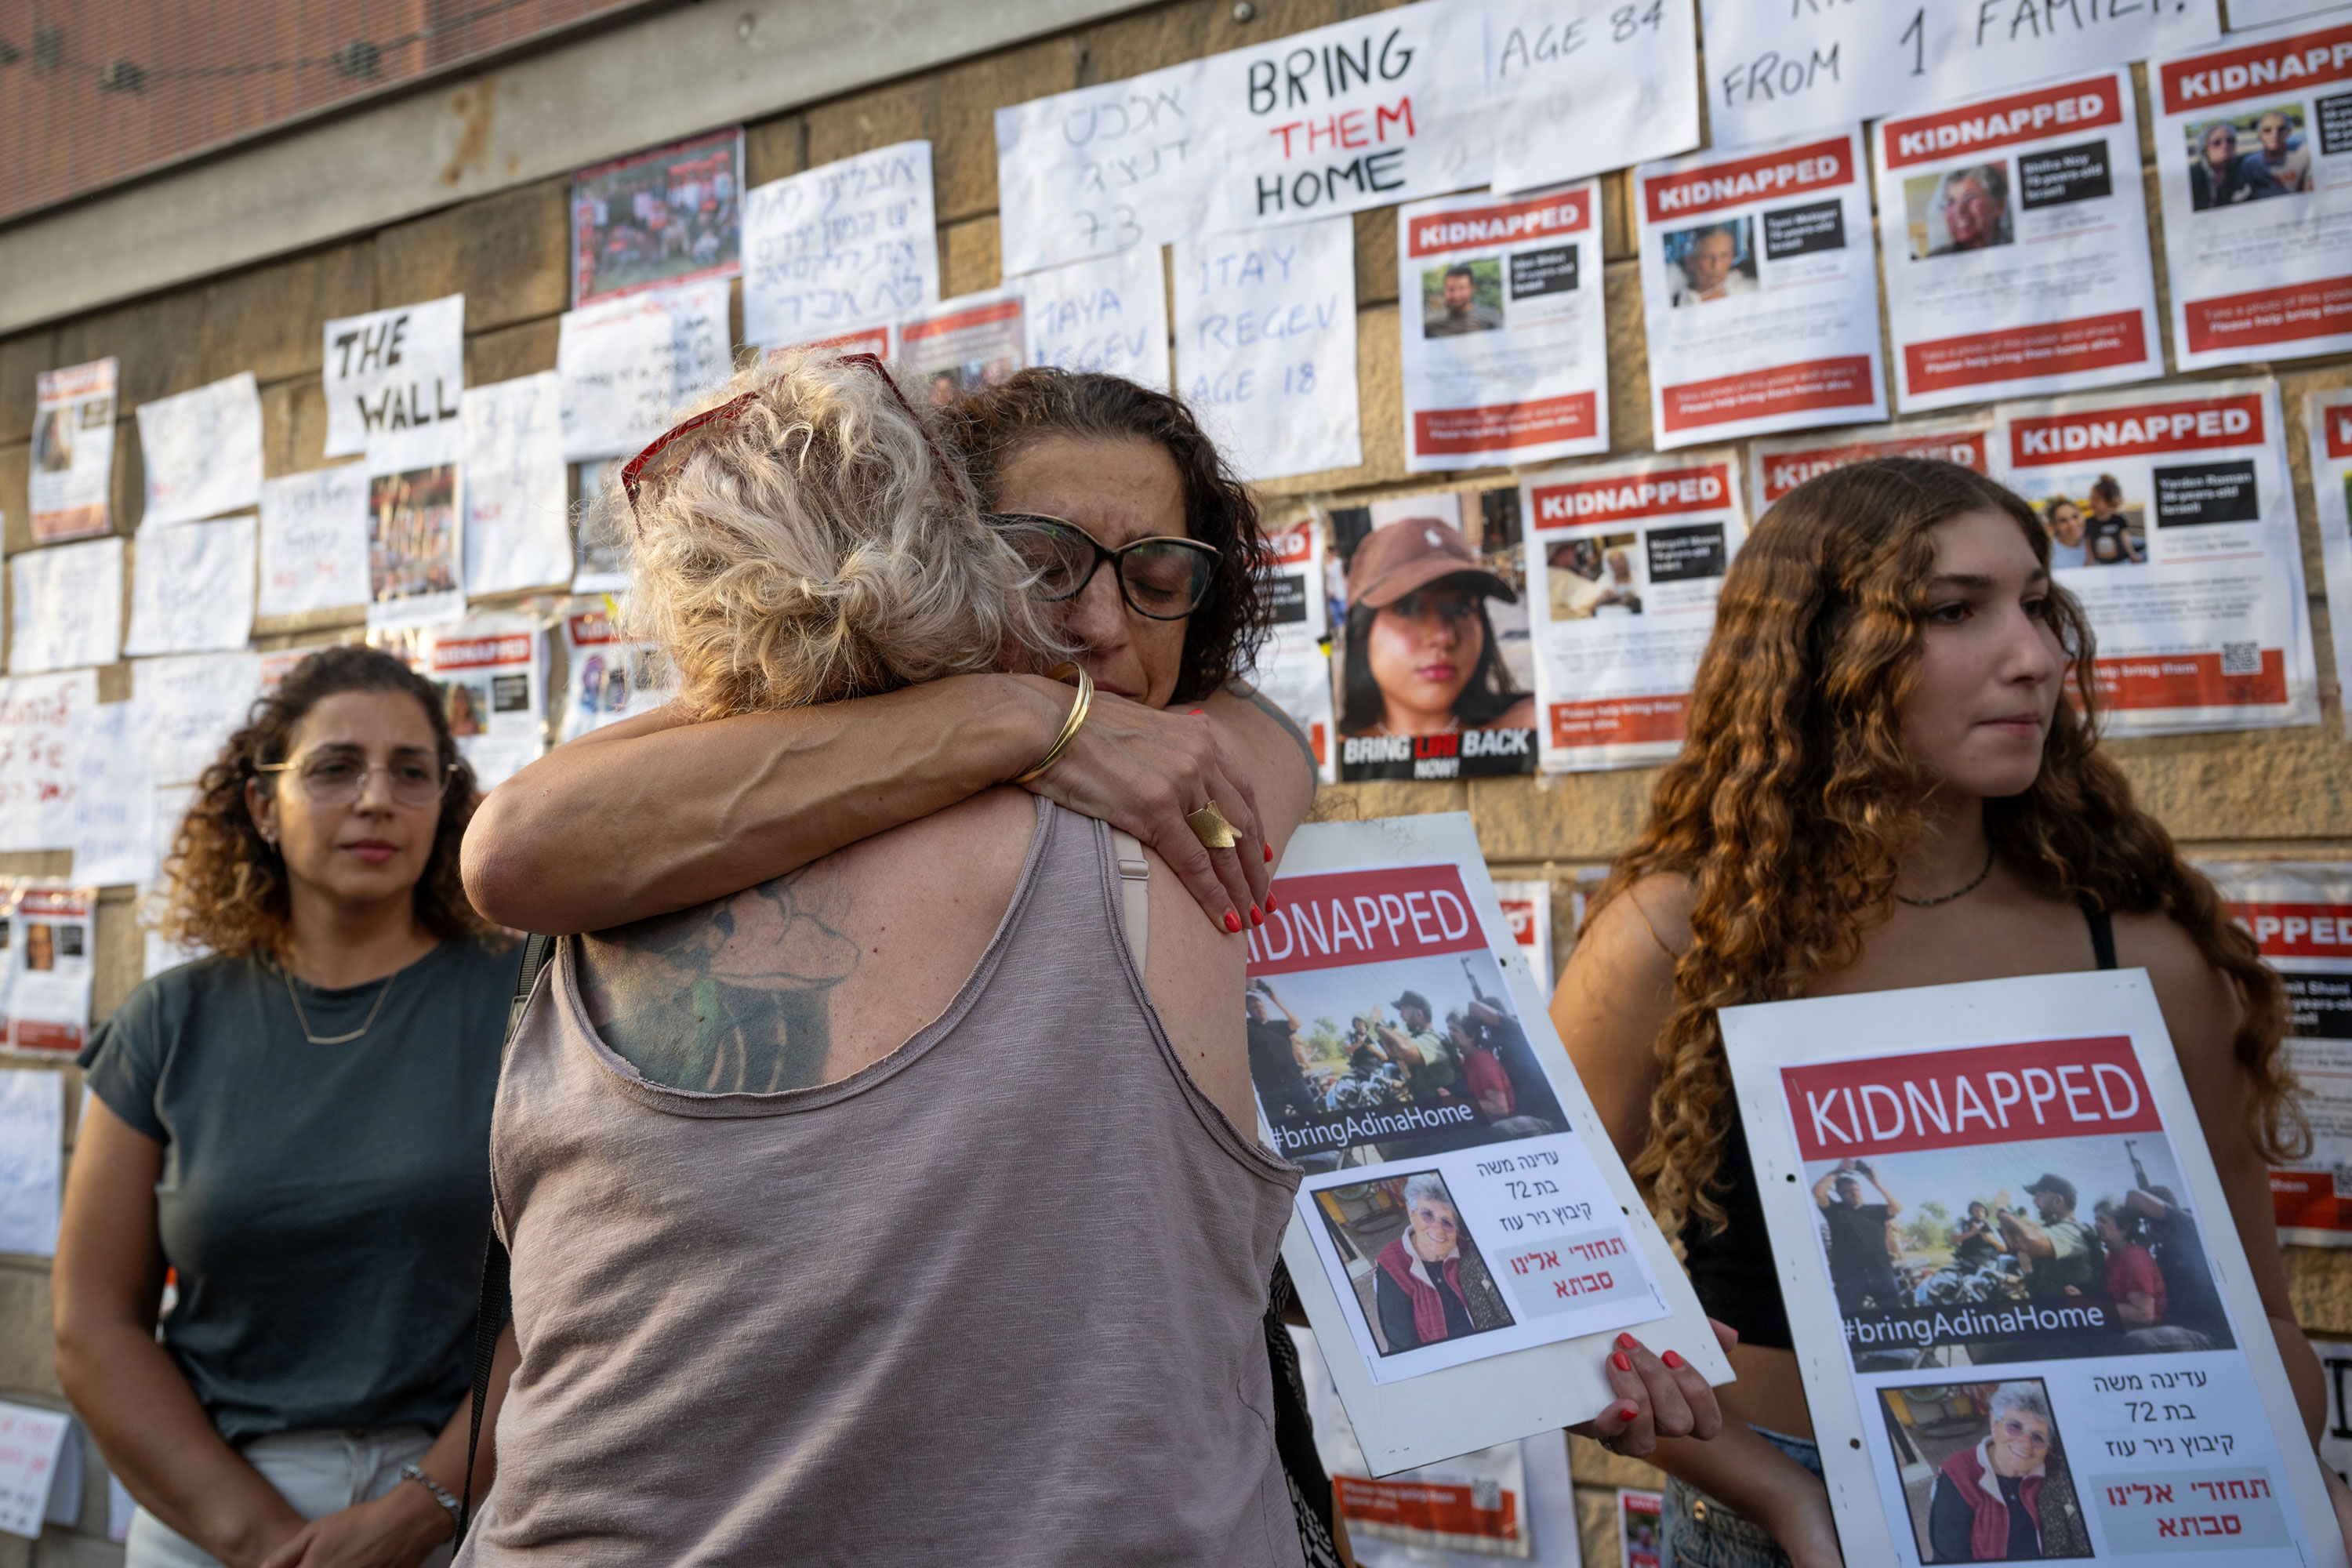 Einav Moshe Barda, the niece of Adina, who was kidnapped, hugs a woman after telling her family's story on Saturday, October 14, outside HaKirya, the government and military quarters in Tel Aviv, Israel. 